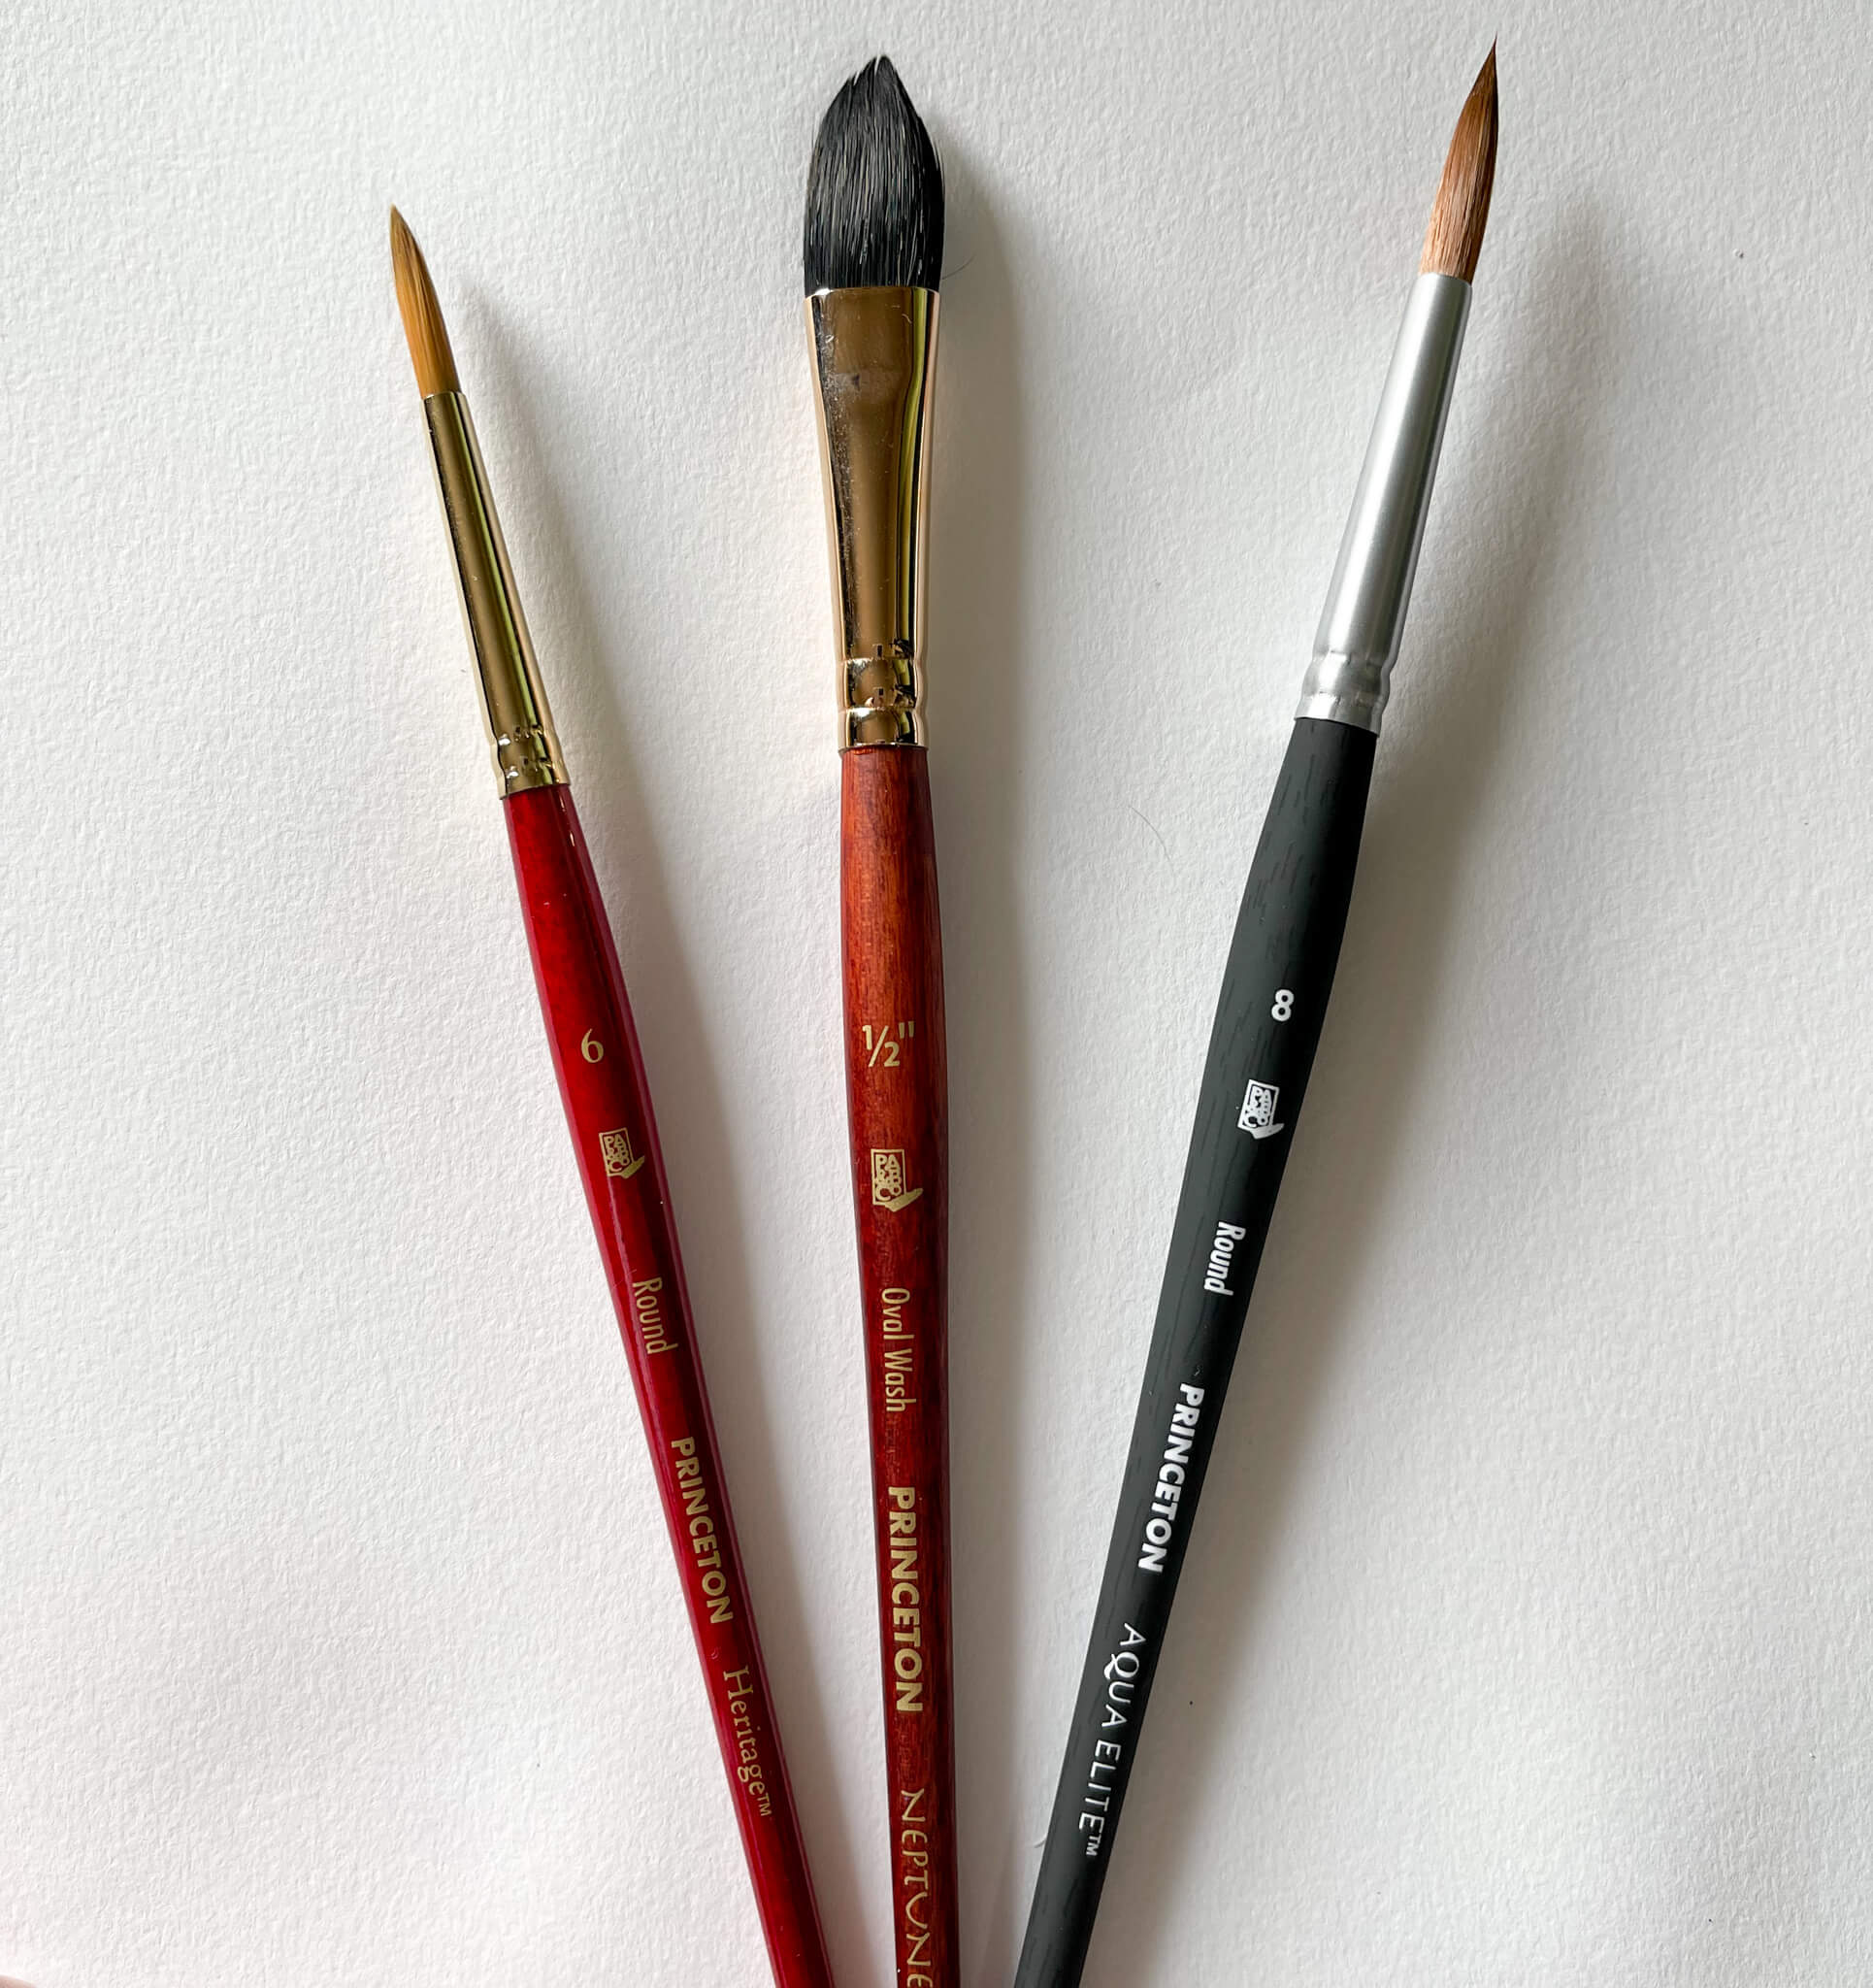 Ultimate Gouache Brushes